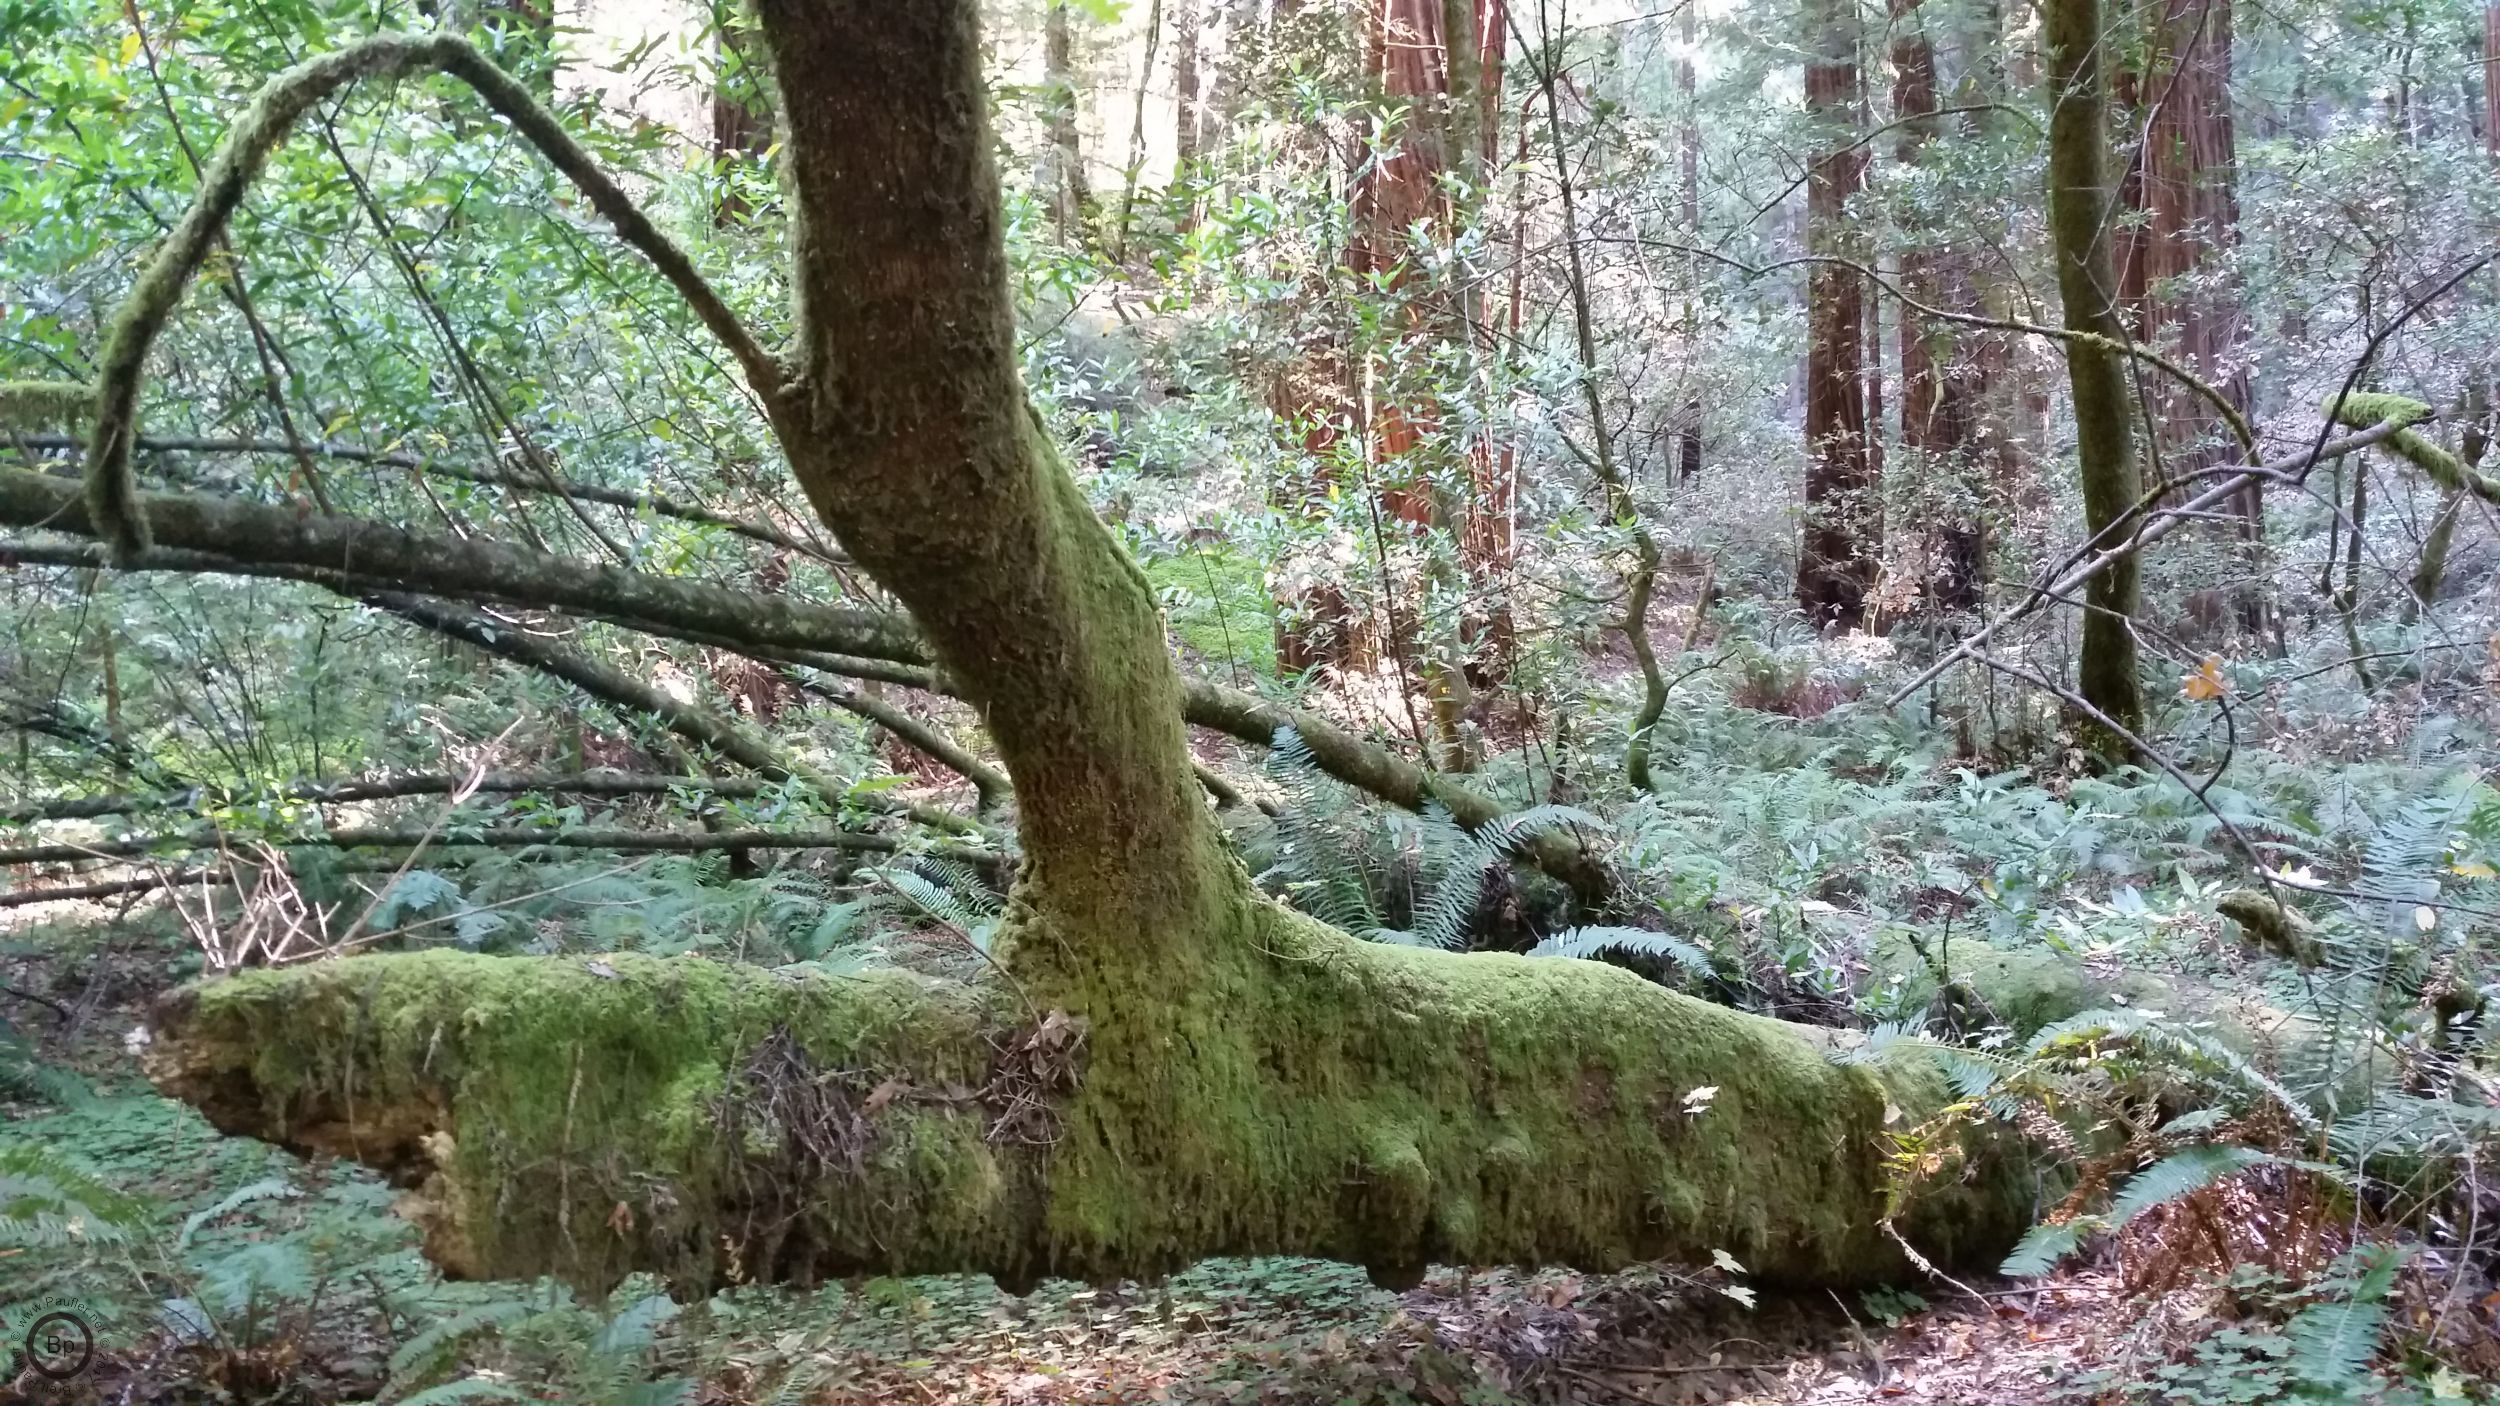 A tree fallen over, I could not tell you if it was still alive, it is covered in moss, and the forest floor extends beyond, sloping up a hill